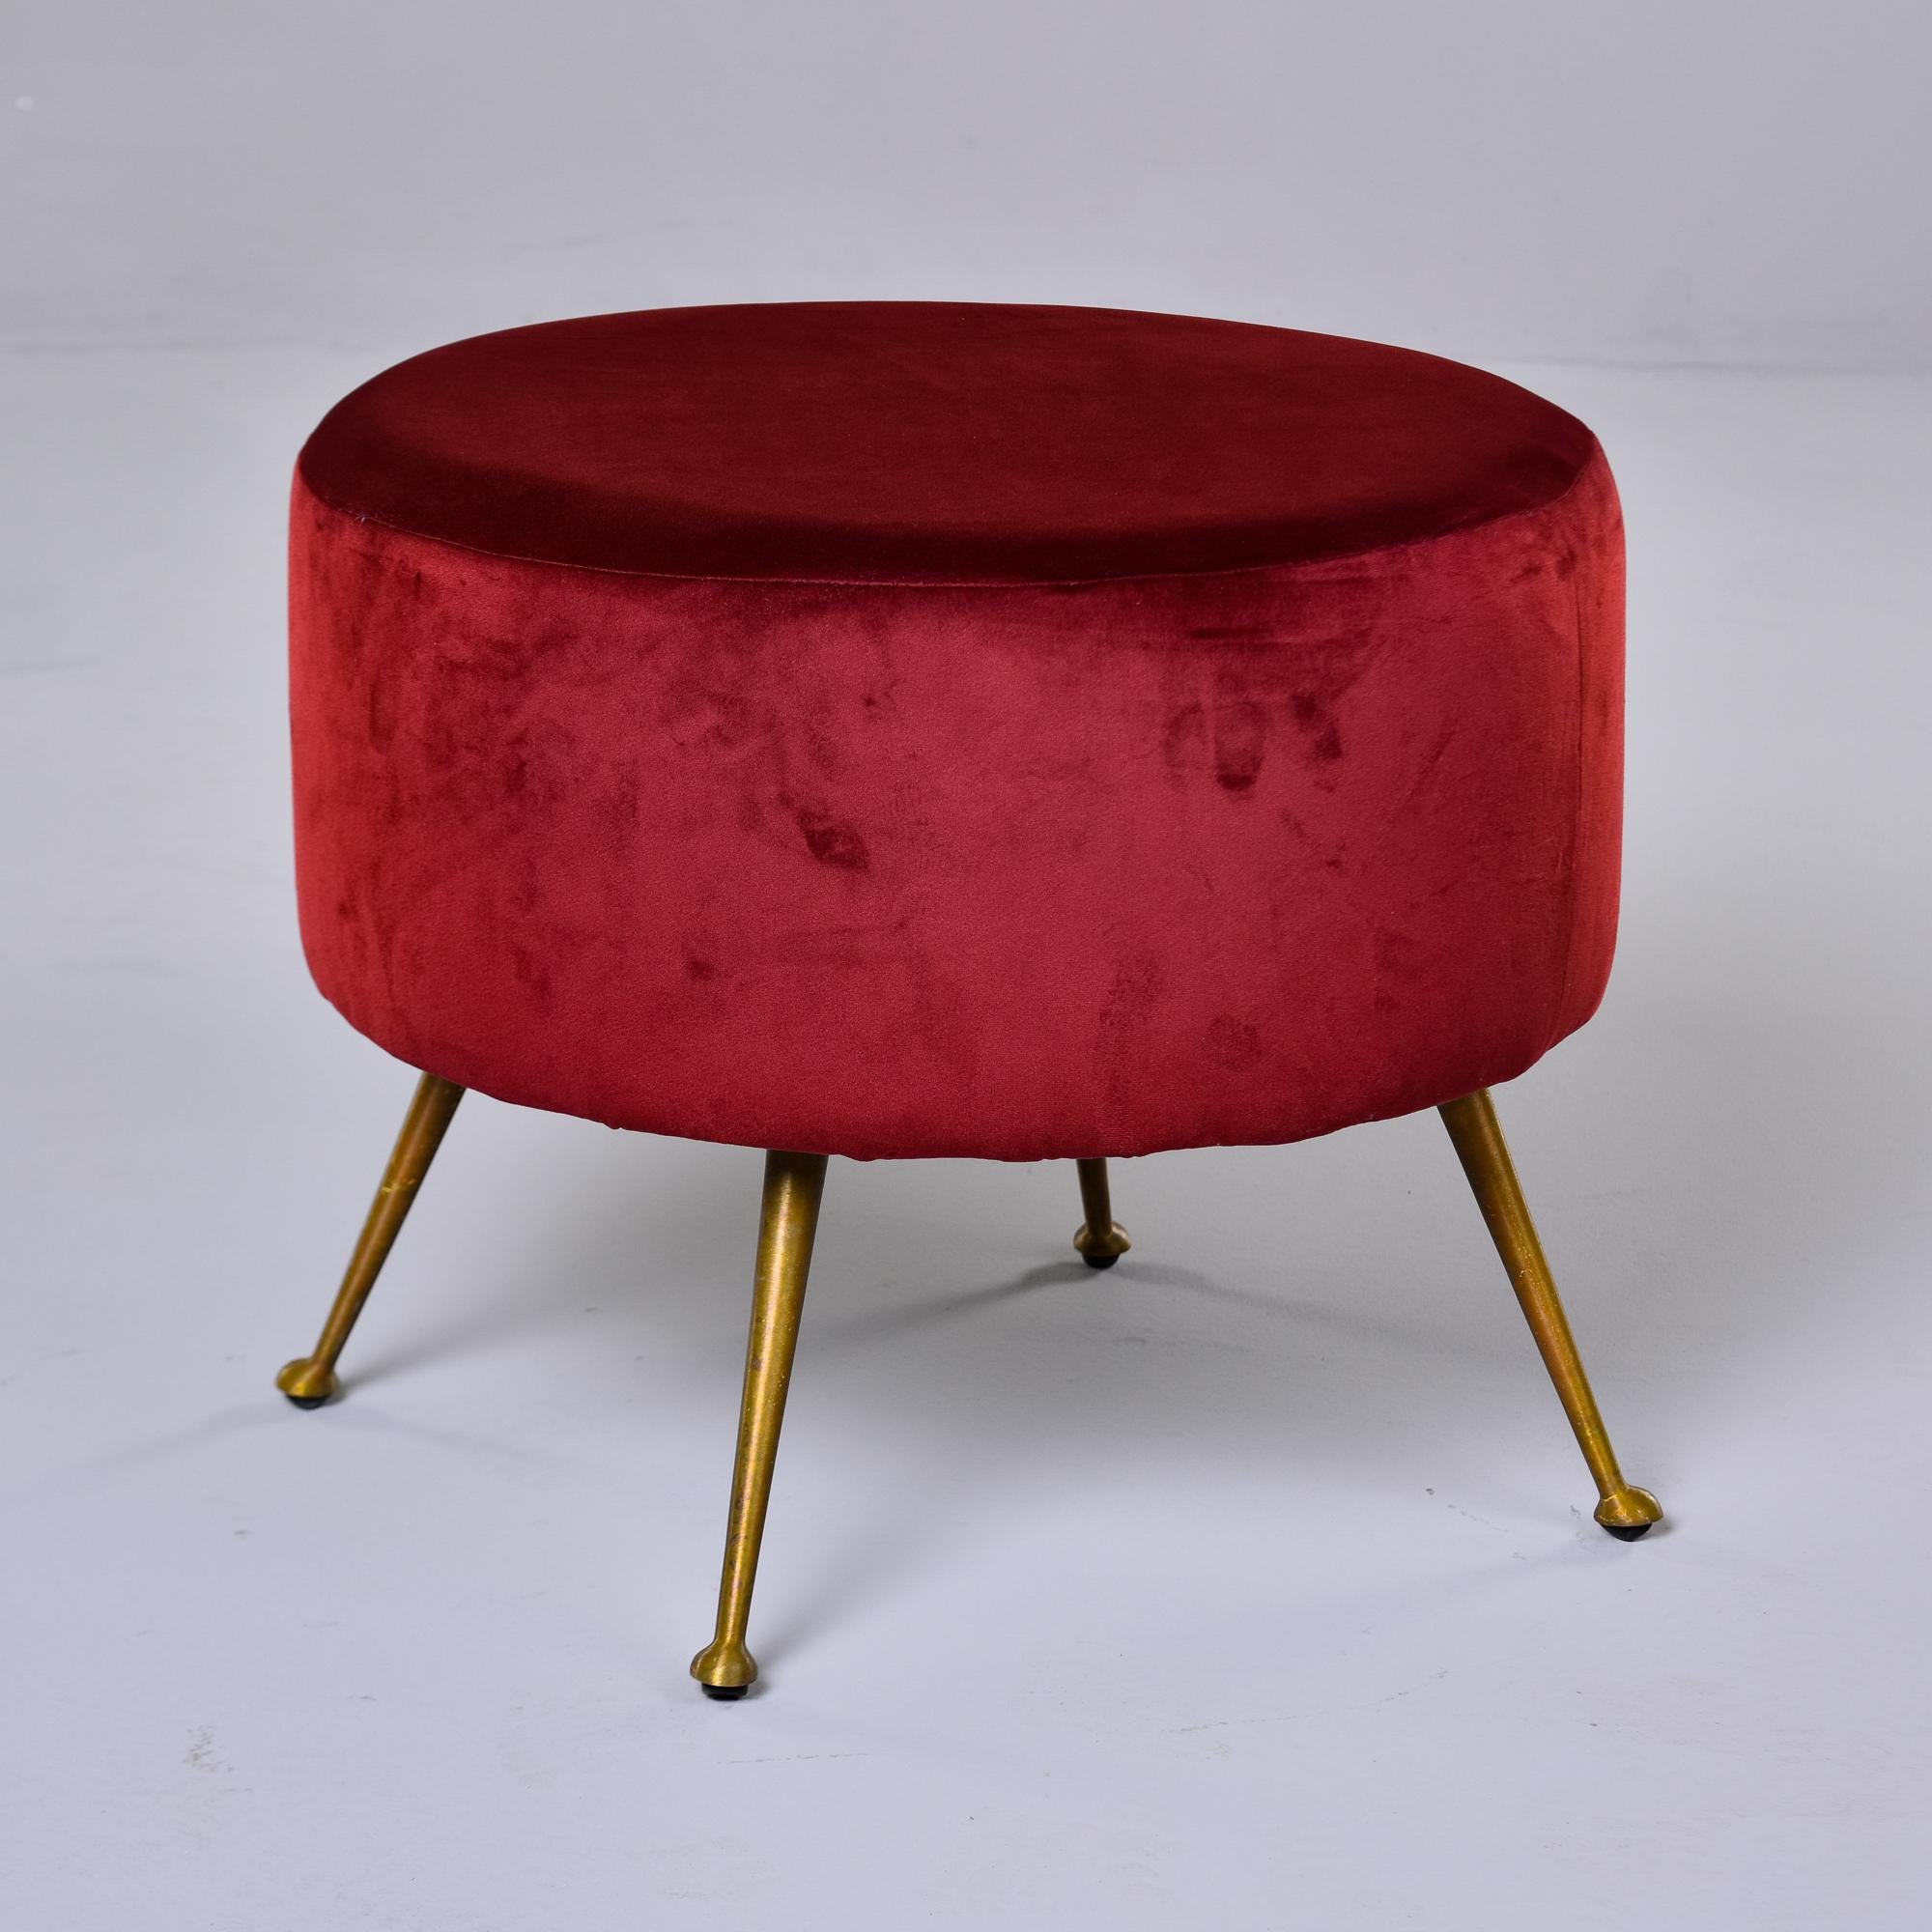 Italian Midcentury Round Stool with Red Upholstery and Brass Legs For Sale 1